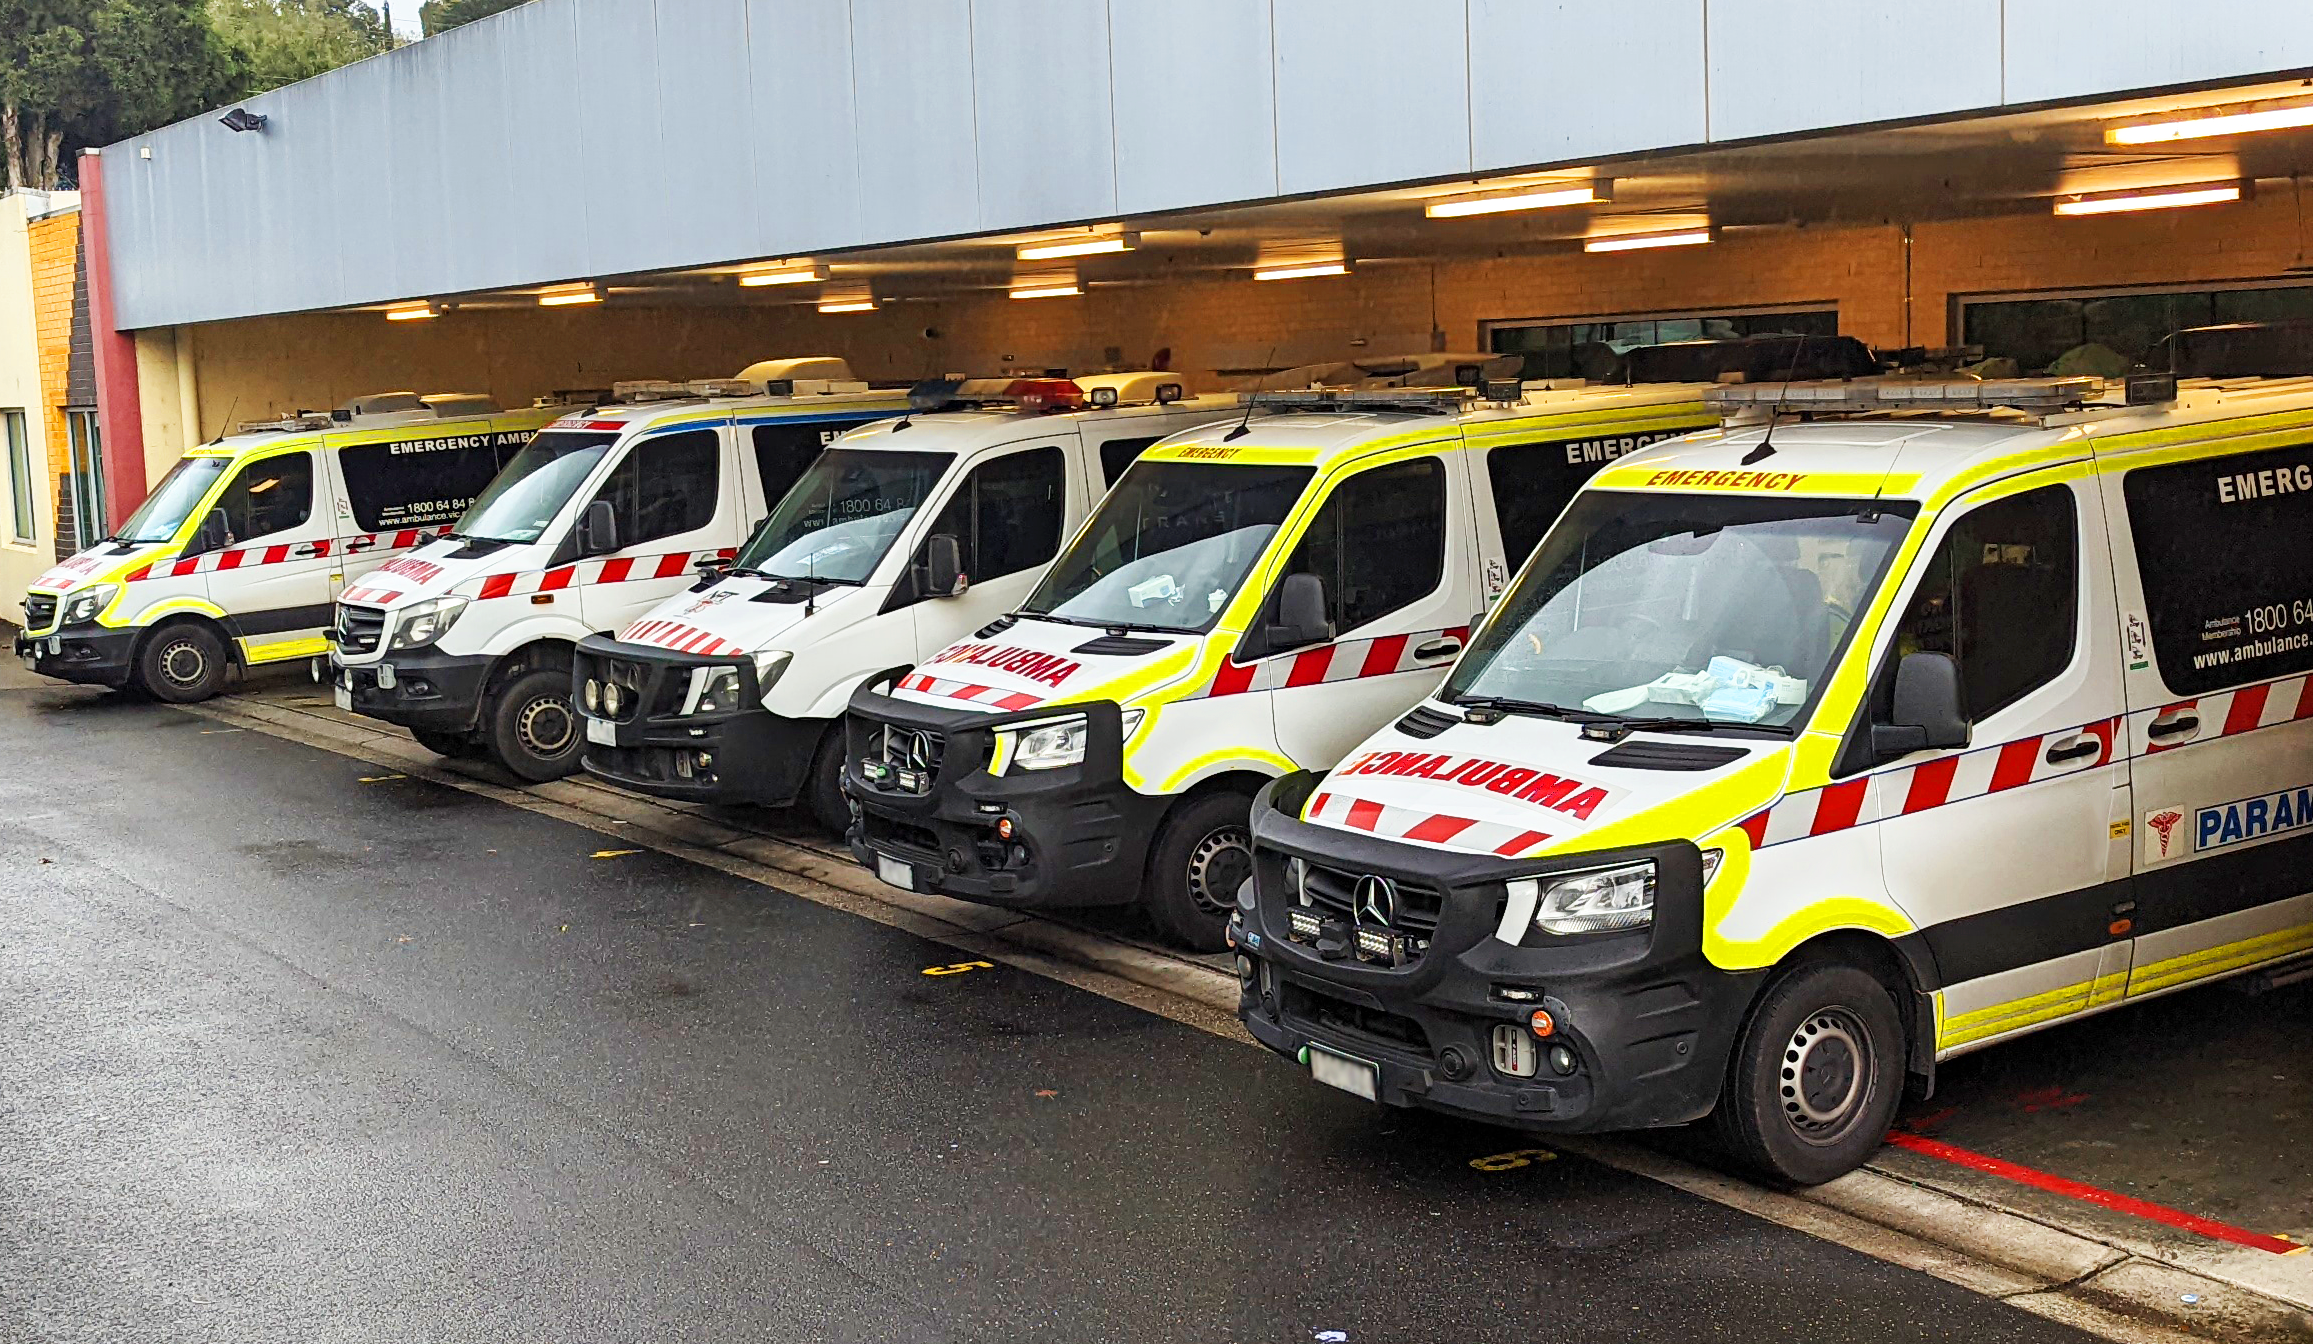 A row of ambulances in a waiting bay